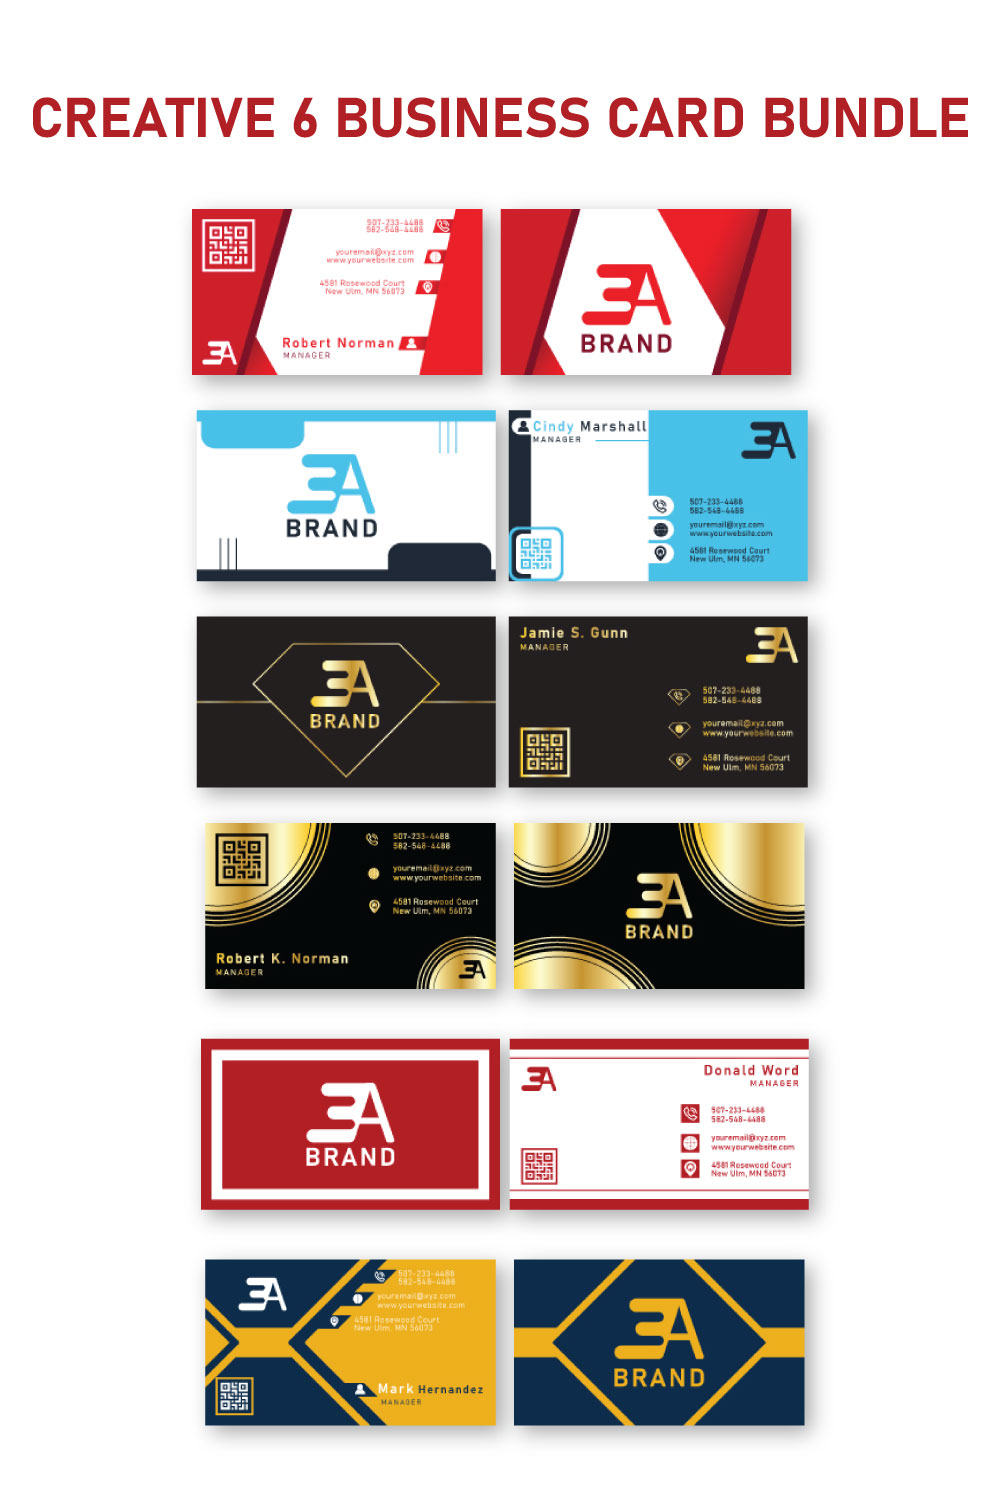 Collection of images of amazing business card templates